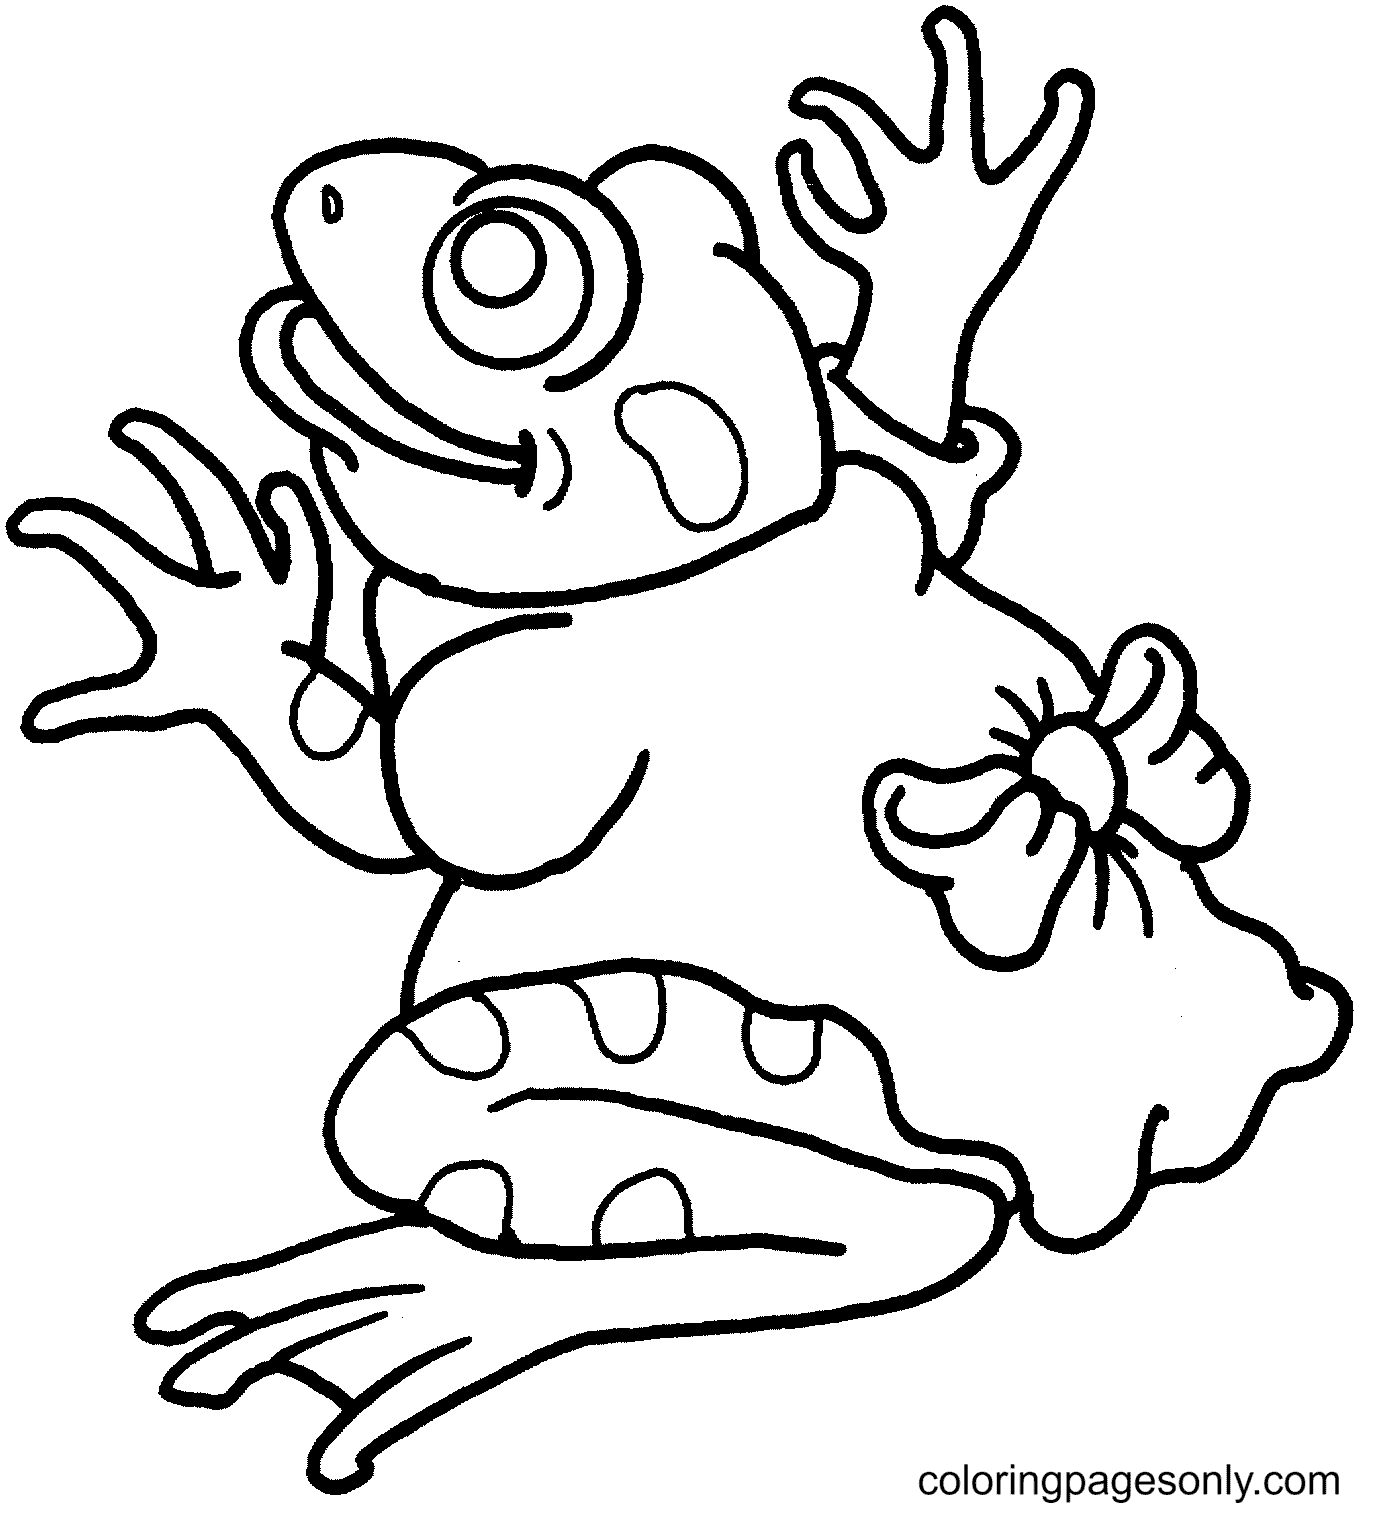 Frog in a Cute Dress Coloring Page